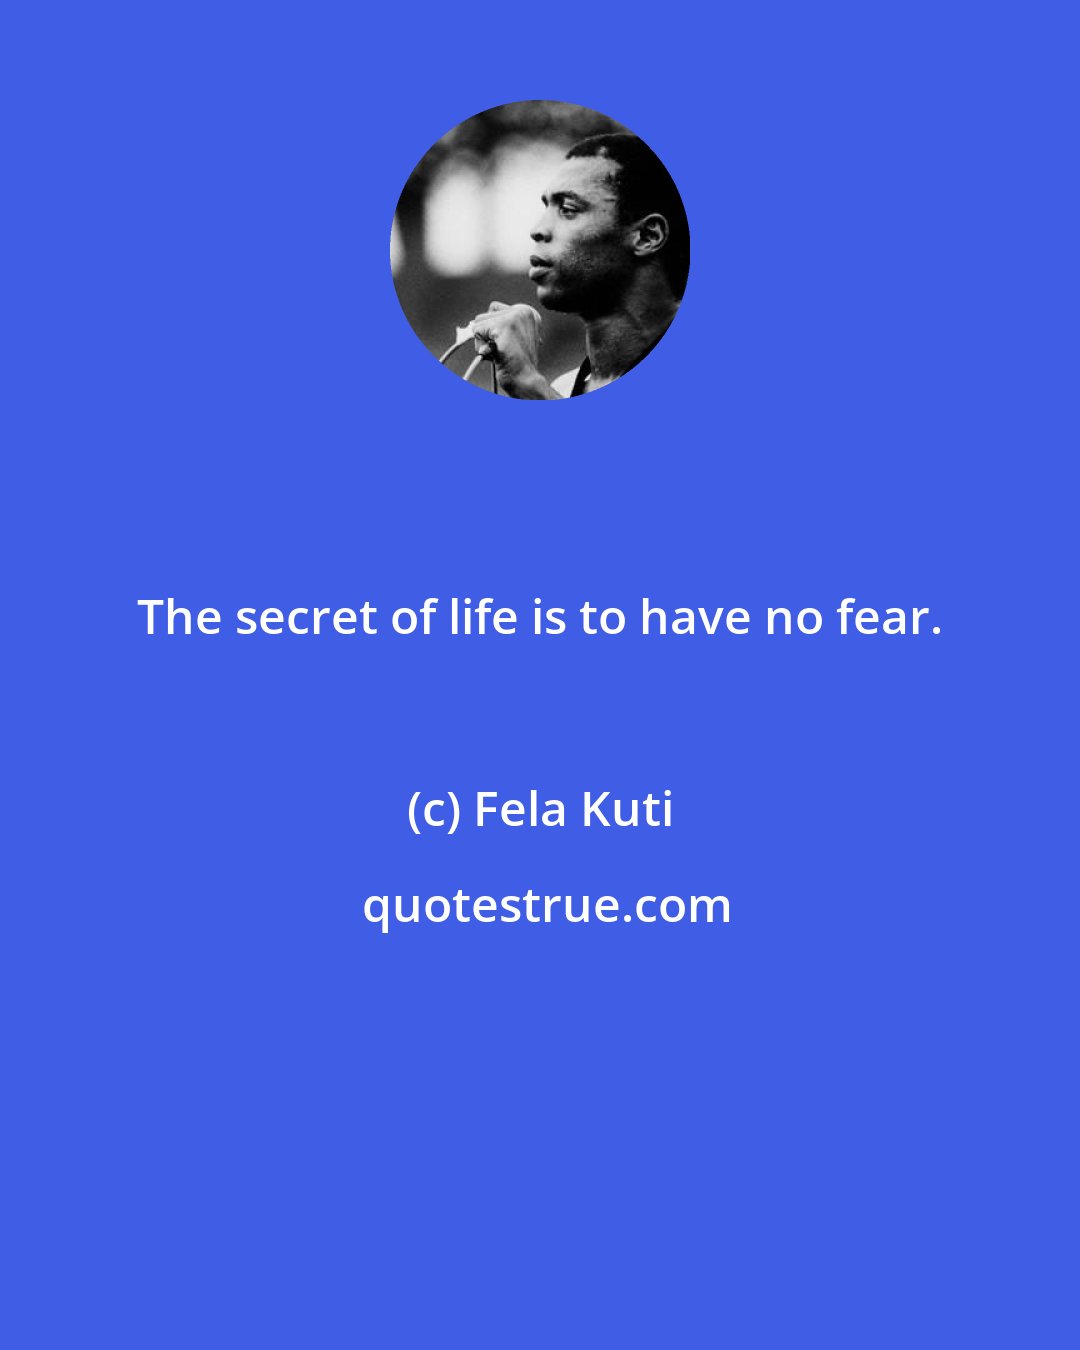 Fela Kuti: The secret of life is to have no fear.